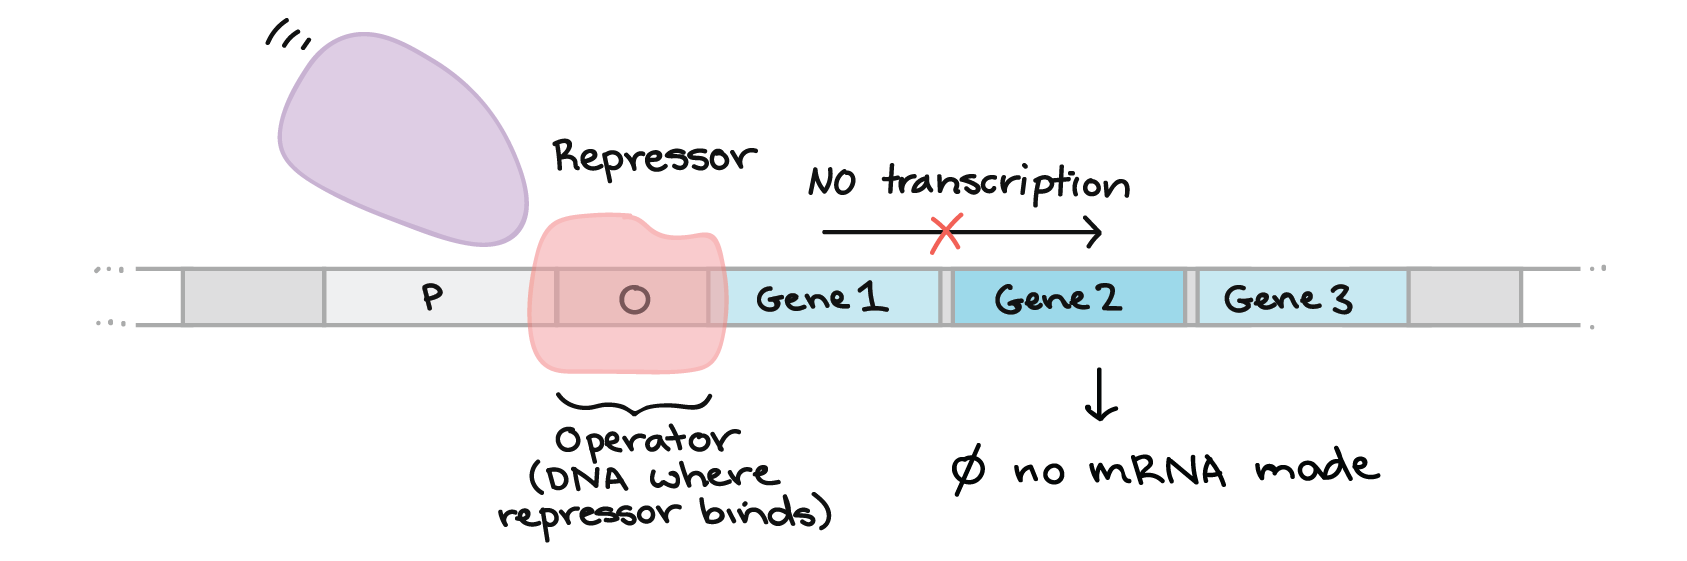 Diagram illustrating how a repressor works. A repressor protein binds to a site called on the operator. In this case (and many other cases), the operator is a region of DNA that overlaps with or lies just downstream of the RNA polymerase binding site (promoter). That is, it is in between the promoter and the genes of the operon. When the repressor binds to the operator, it prevents RNA polymerase from binding to the promoter and/or transcribing the operon. When the repressor is bound to the operator, no transcription occurs and no mRNA is made.